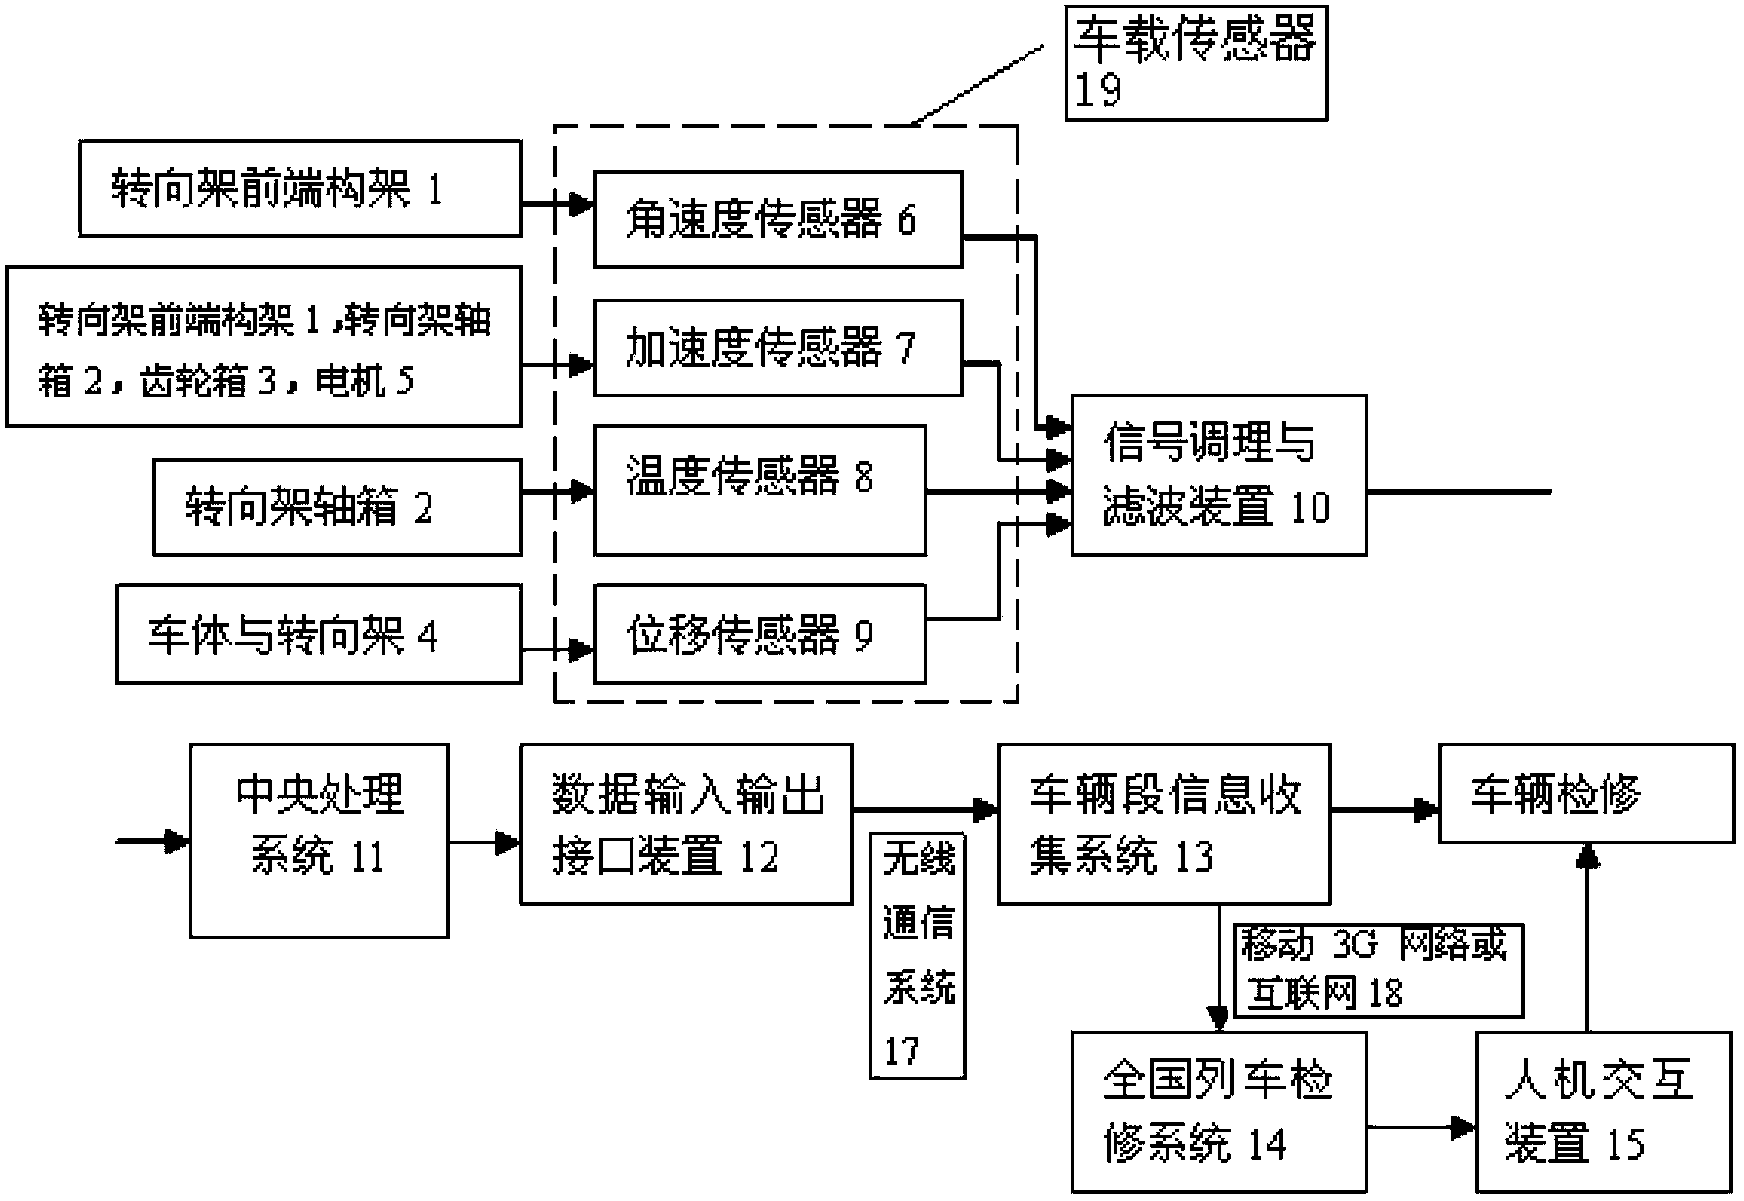 High-speed train running gear fault diagnosis and remote monitoring system based on Internet of Things